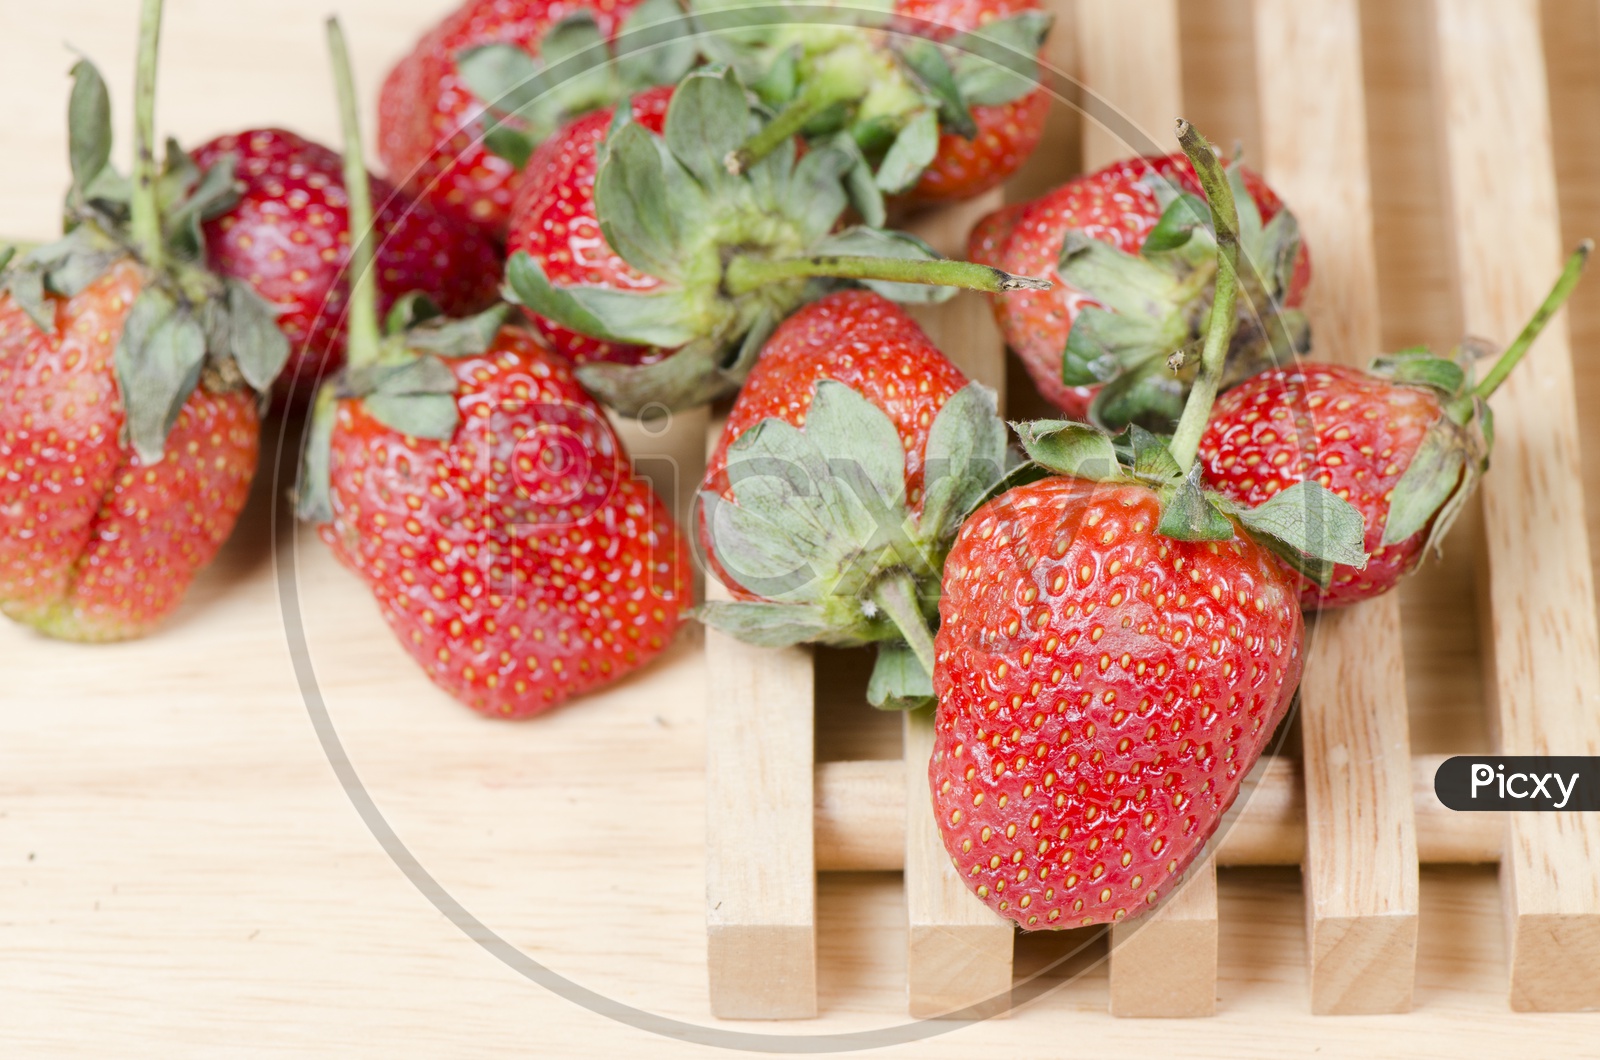 Delicious Strawberries isolated on wooden background